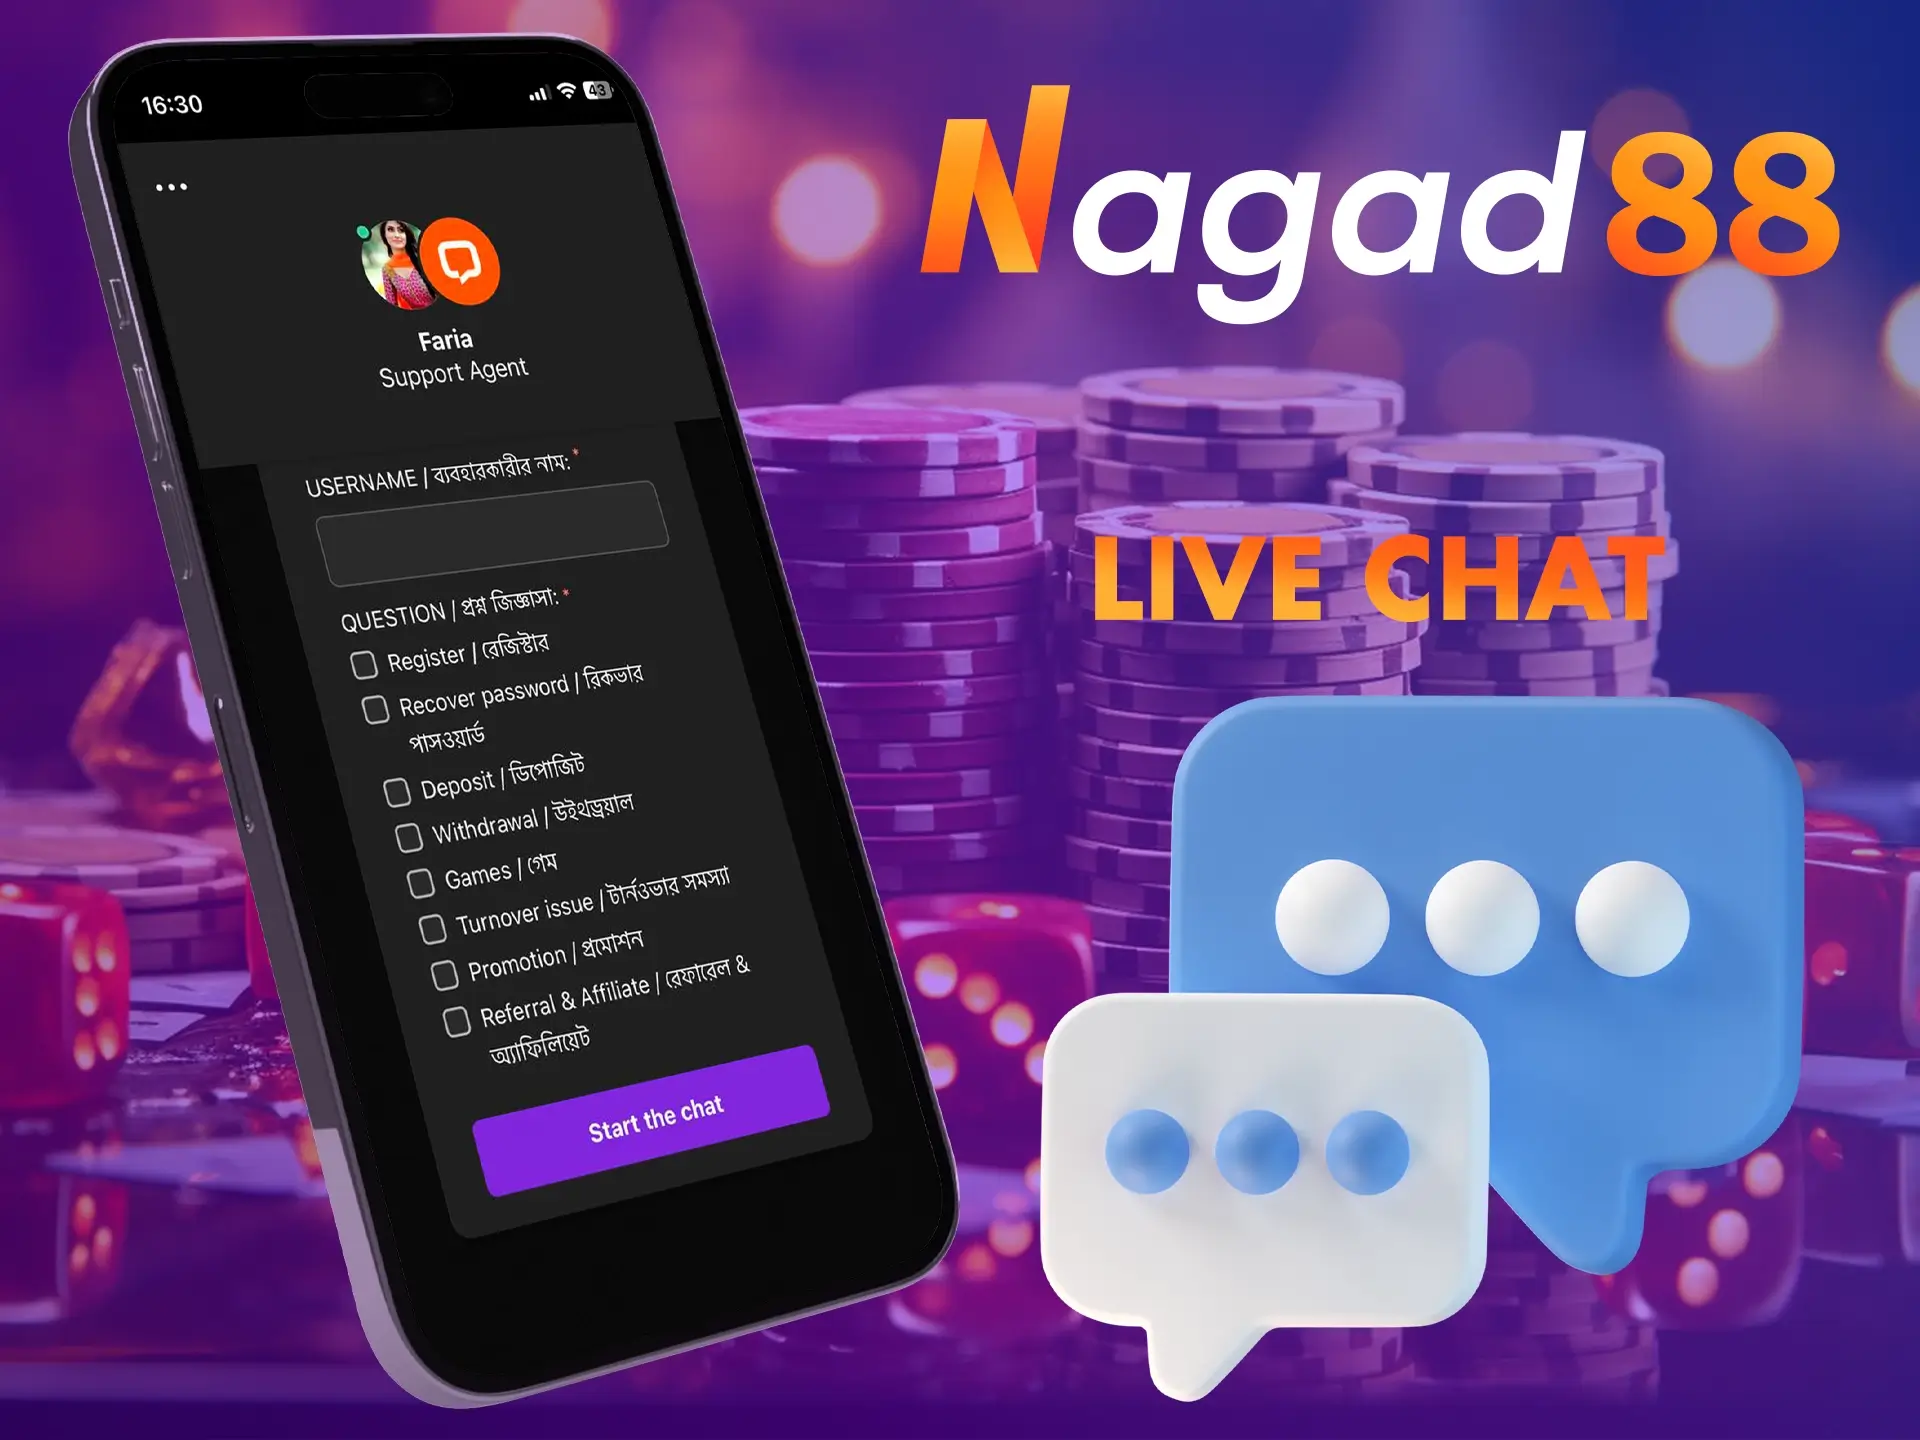 Nagad88's team of professionals will answer any question you may have.